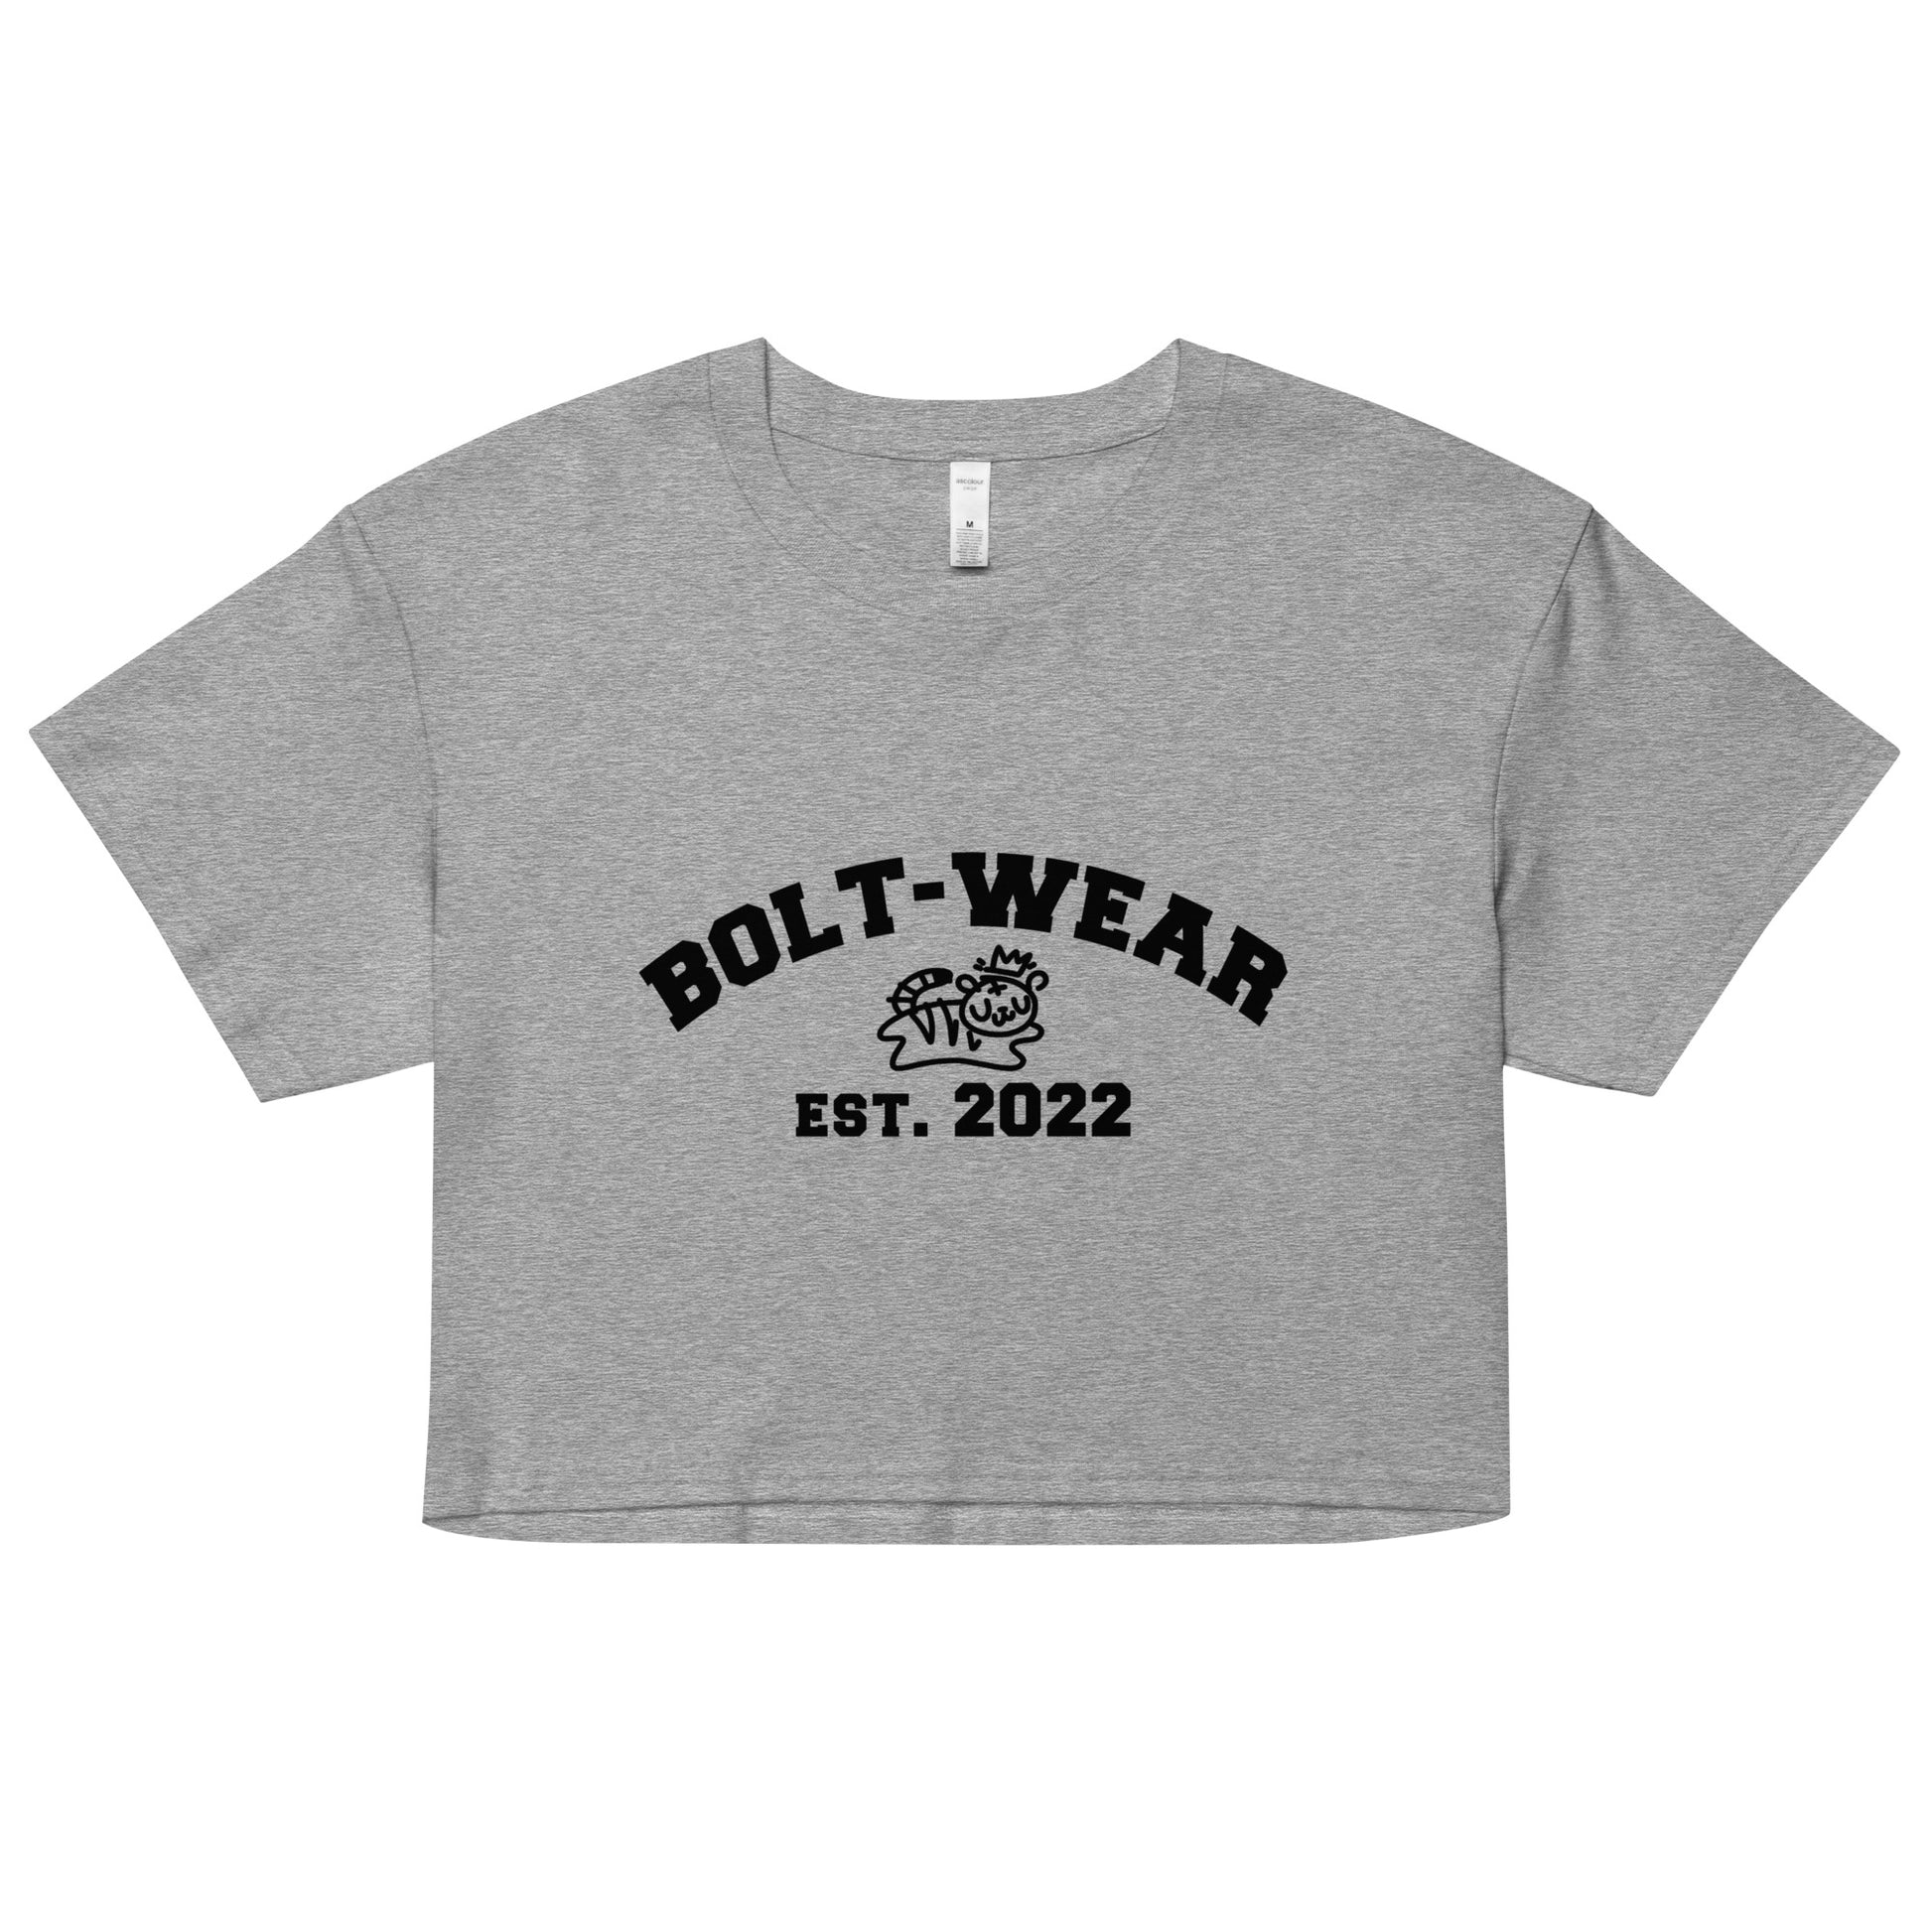 grey athletic heather unisex crop top with image of bolt-wear tiger logo and text with 2022 as the established date of bolt-wear.